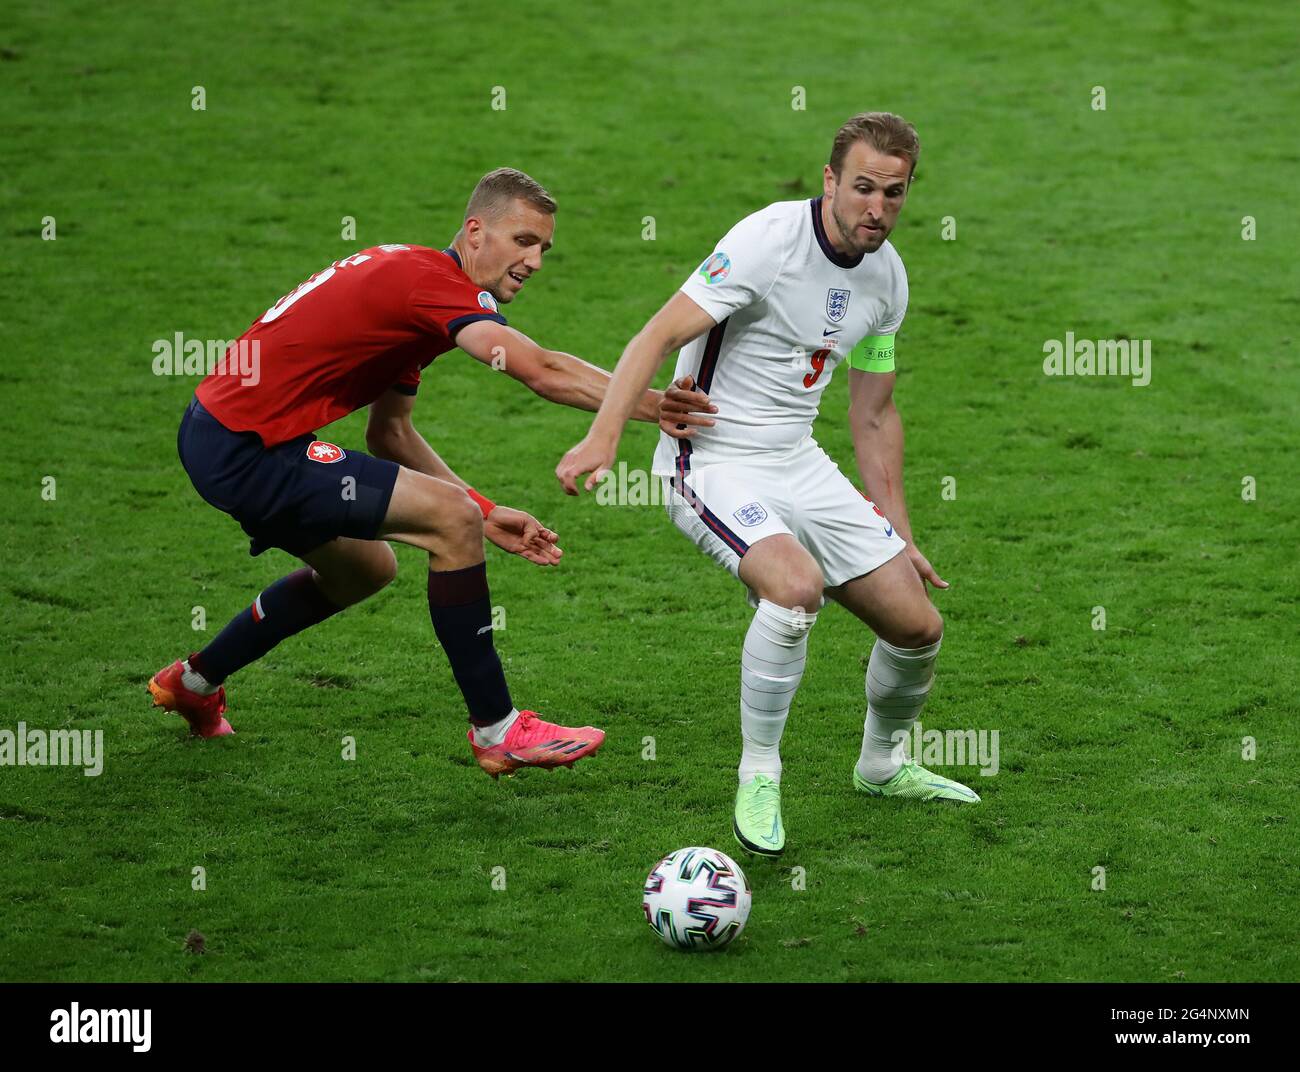 London, England, 22nd June 2021. Harry Kane of England and Tomas Soucek of Czech Republic during the UEFA European Championships match at Wembley Stadium, London. Picture credit should read: David Klein / Sportimage Stock Photo